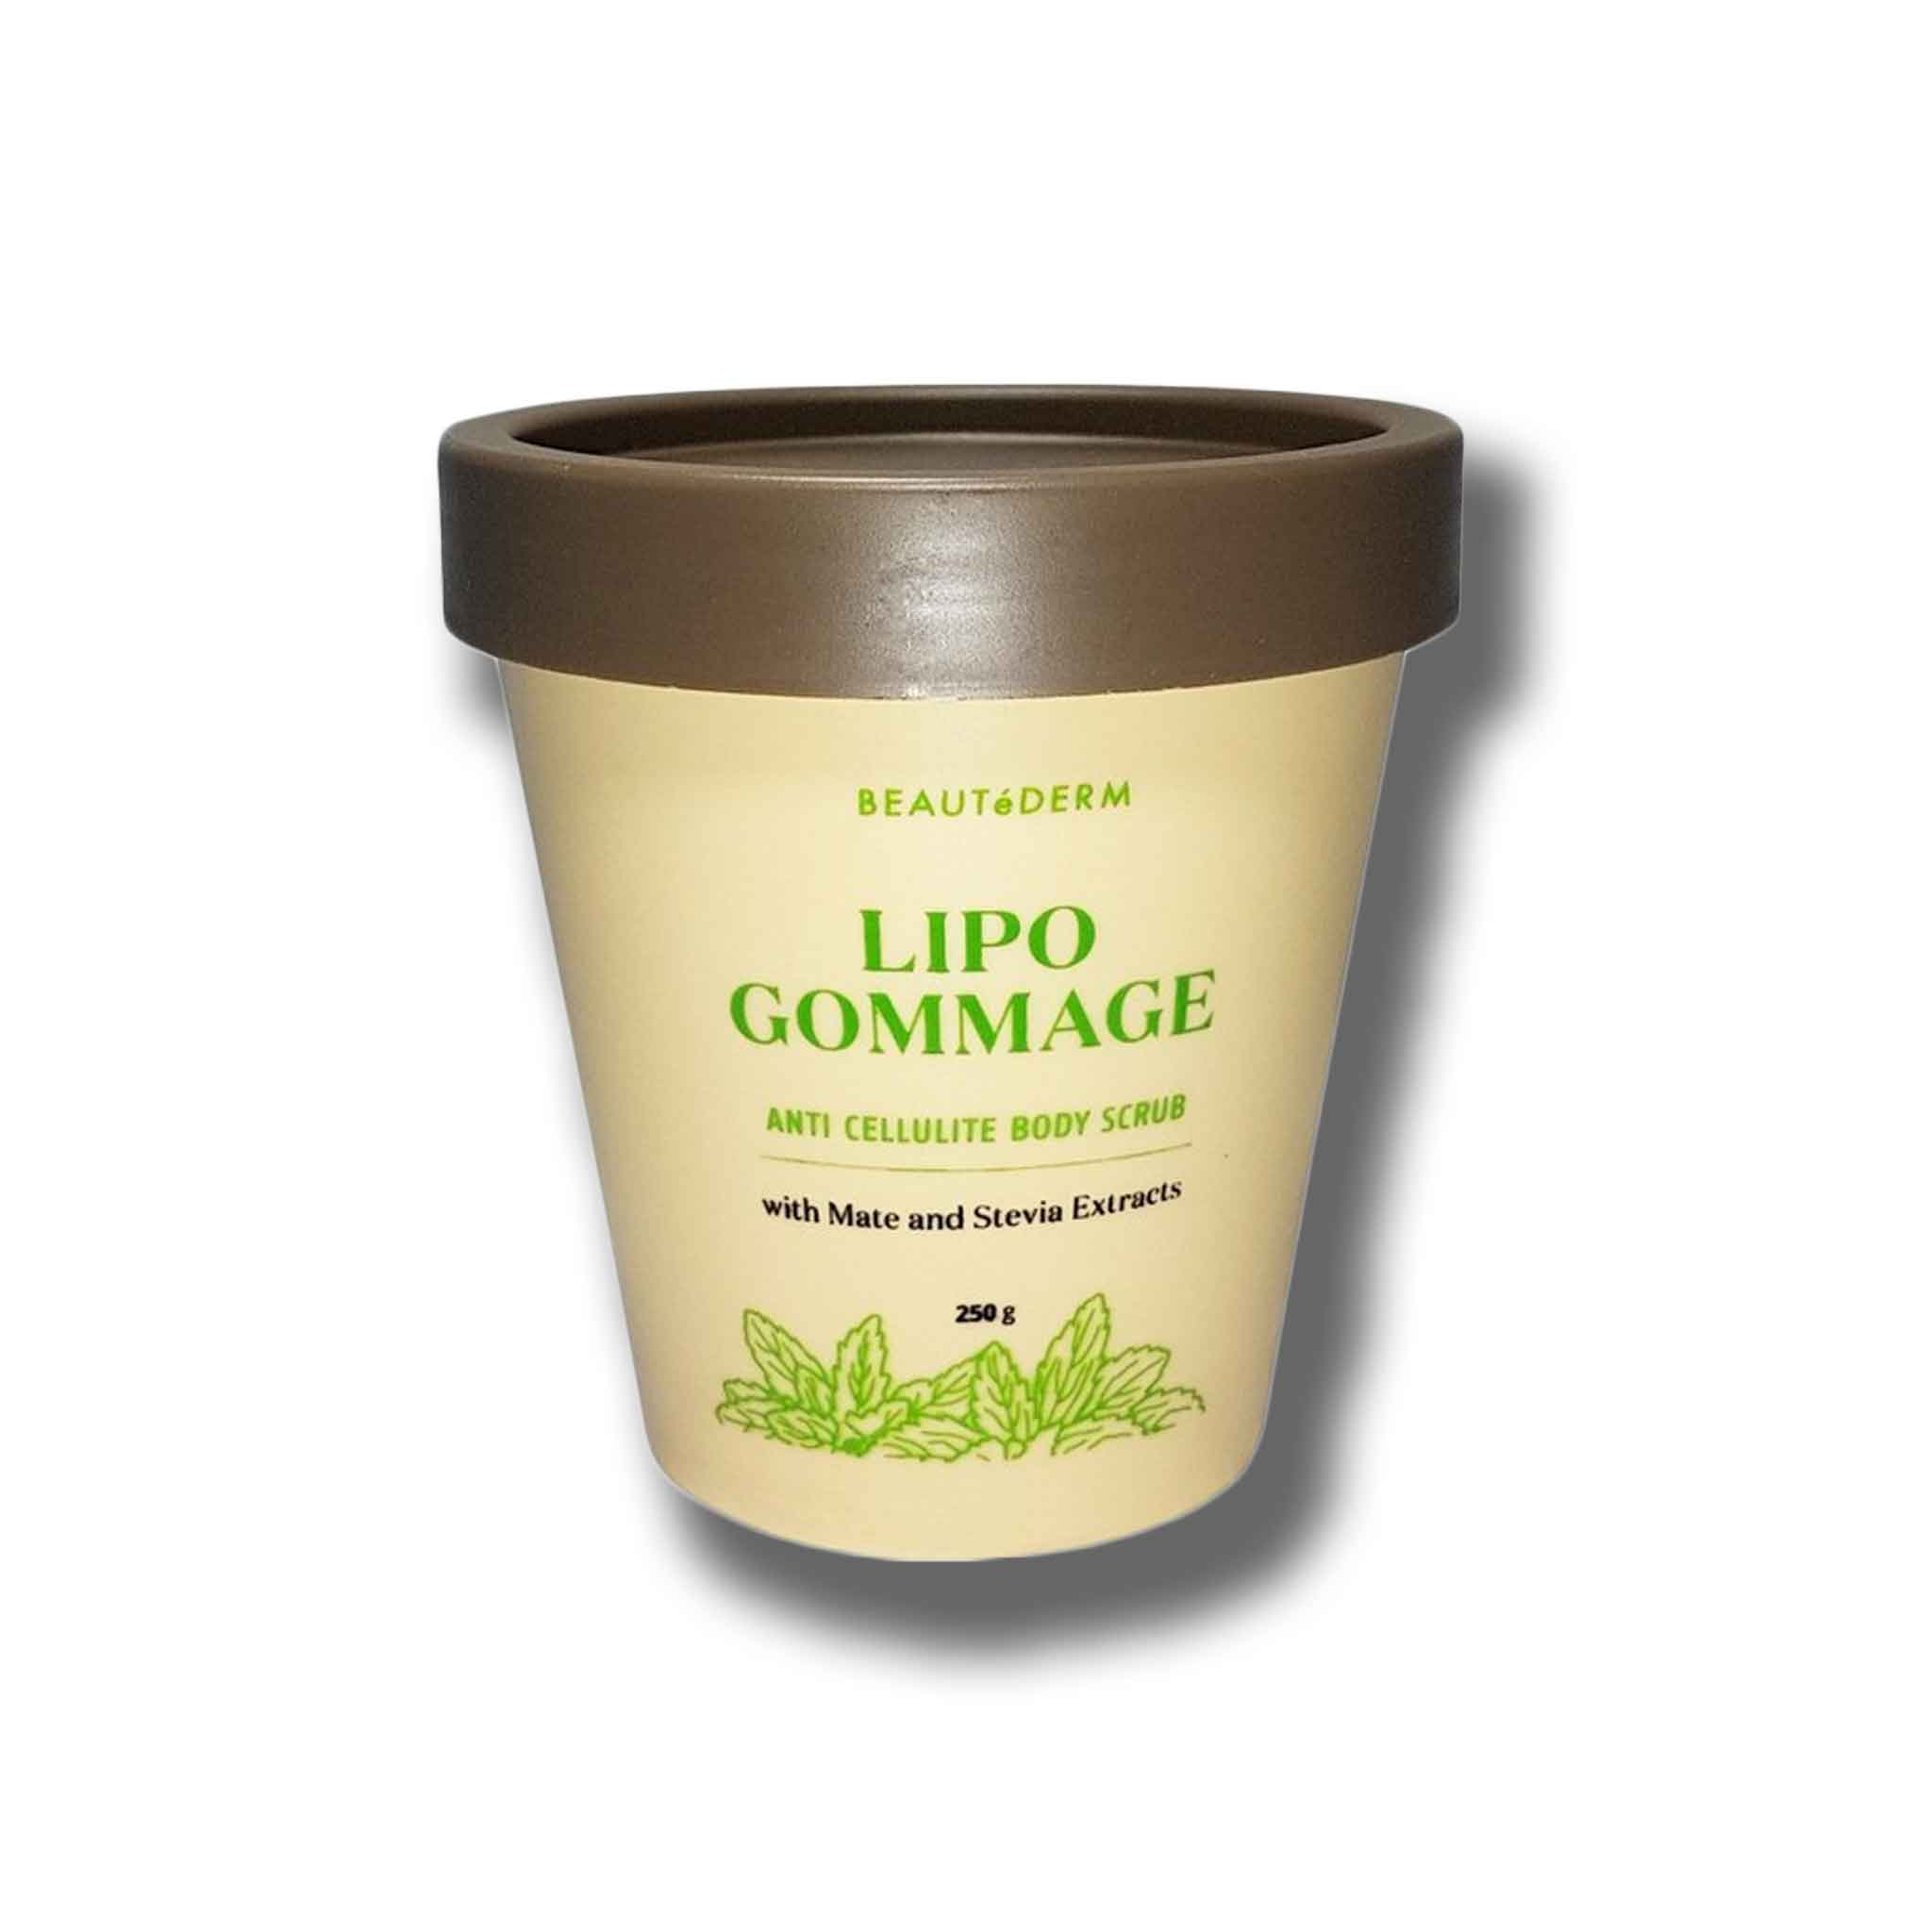 Beautederm Lipo Gommage, Anti Cellulite Body Scrub, with Mate & Stevia Extracts, 250g